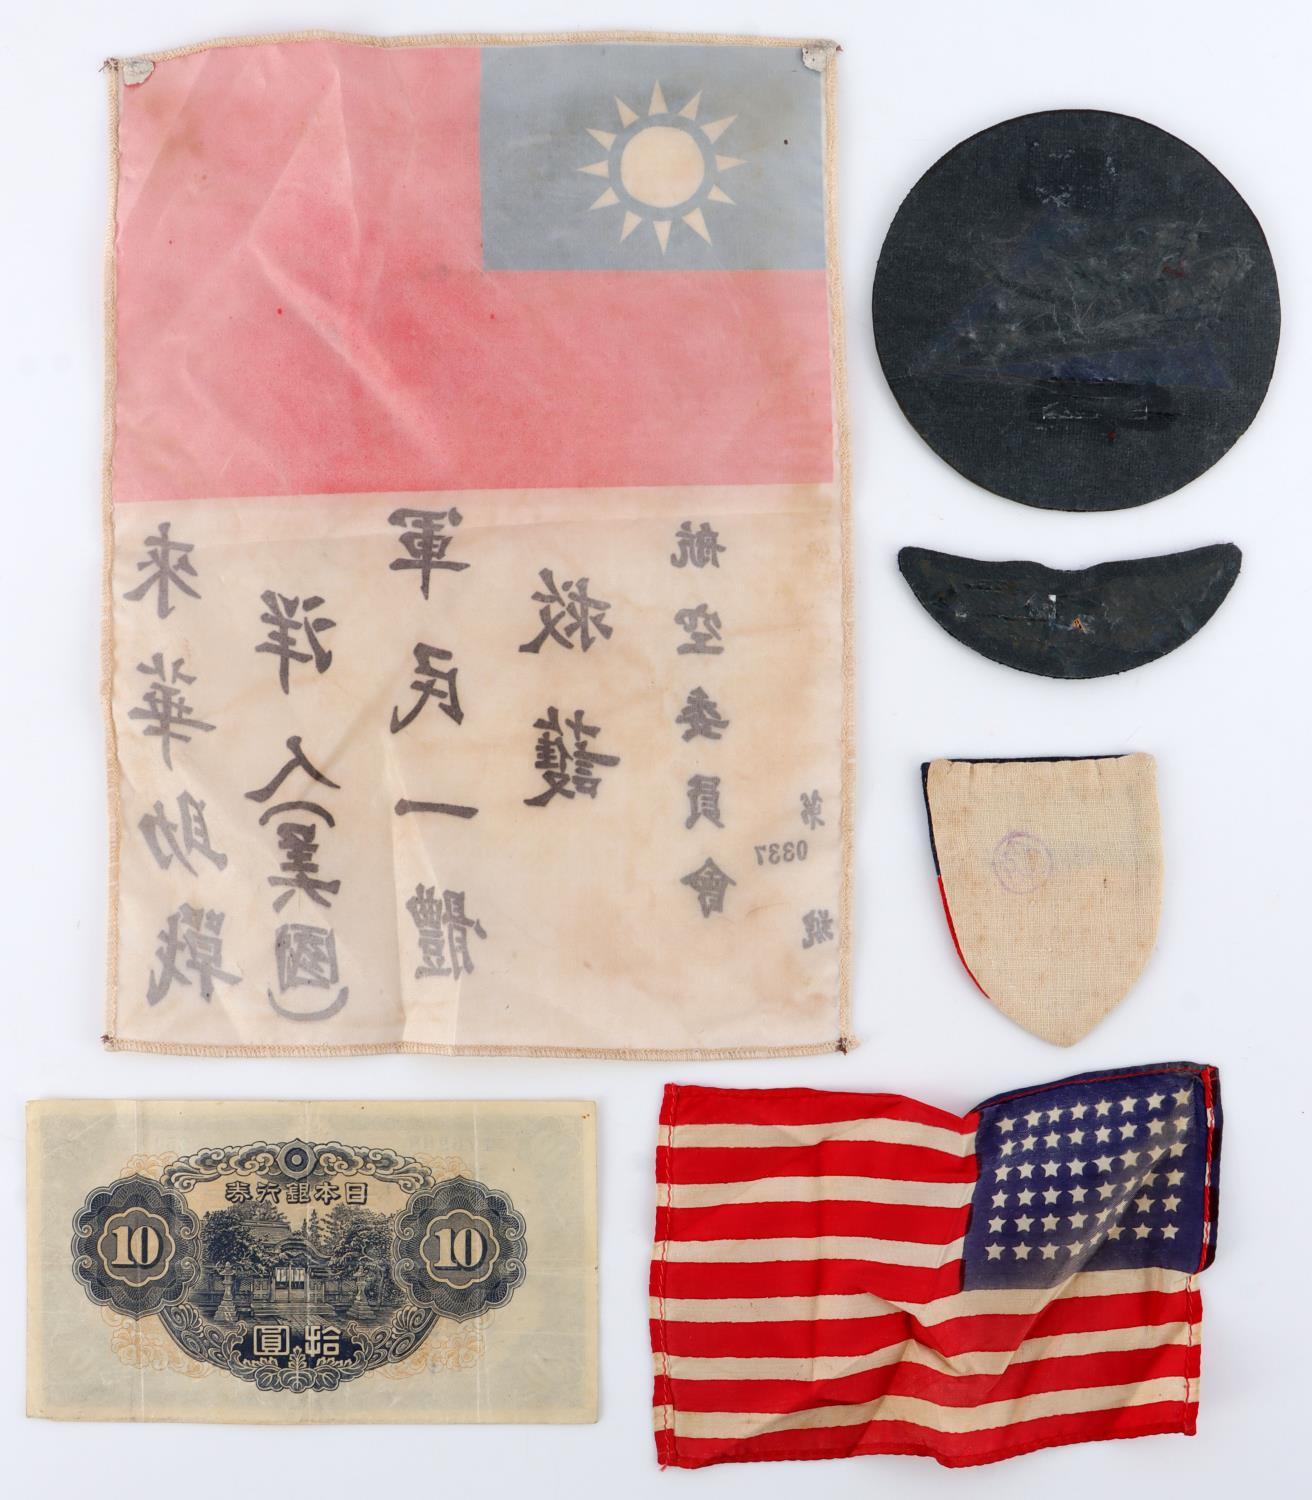 WWII US ARMY CBI BLOOD CHIT & INSIGNIA GROUPING